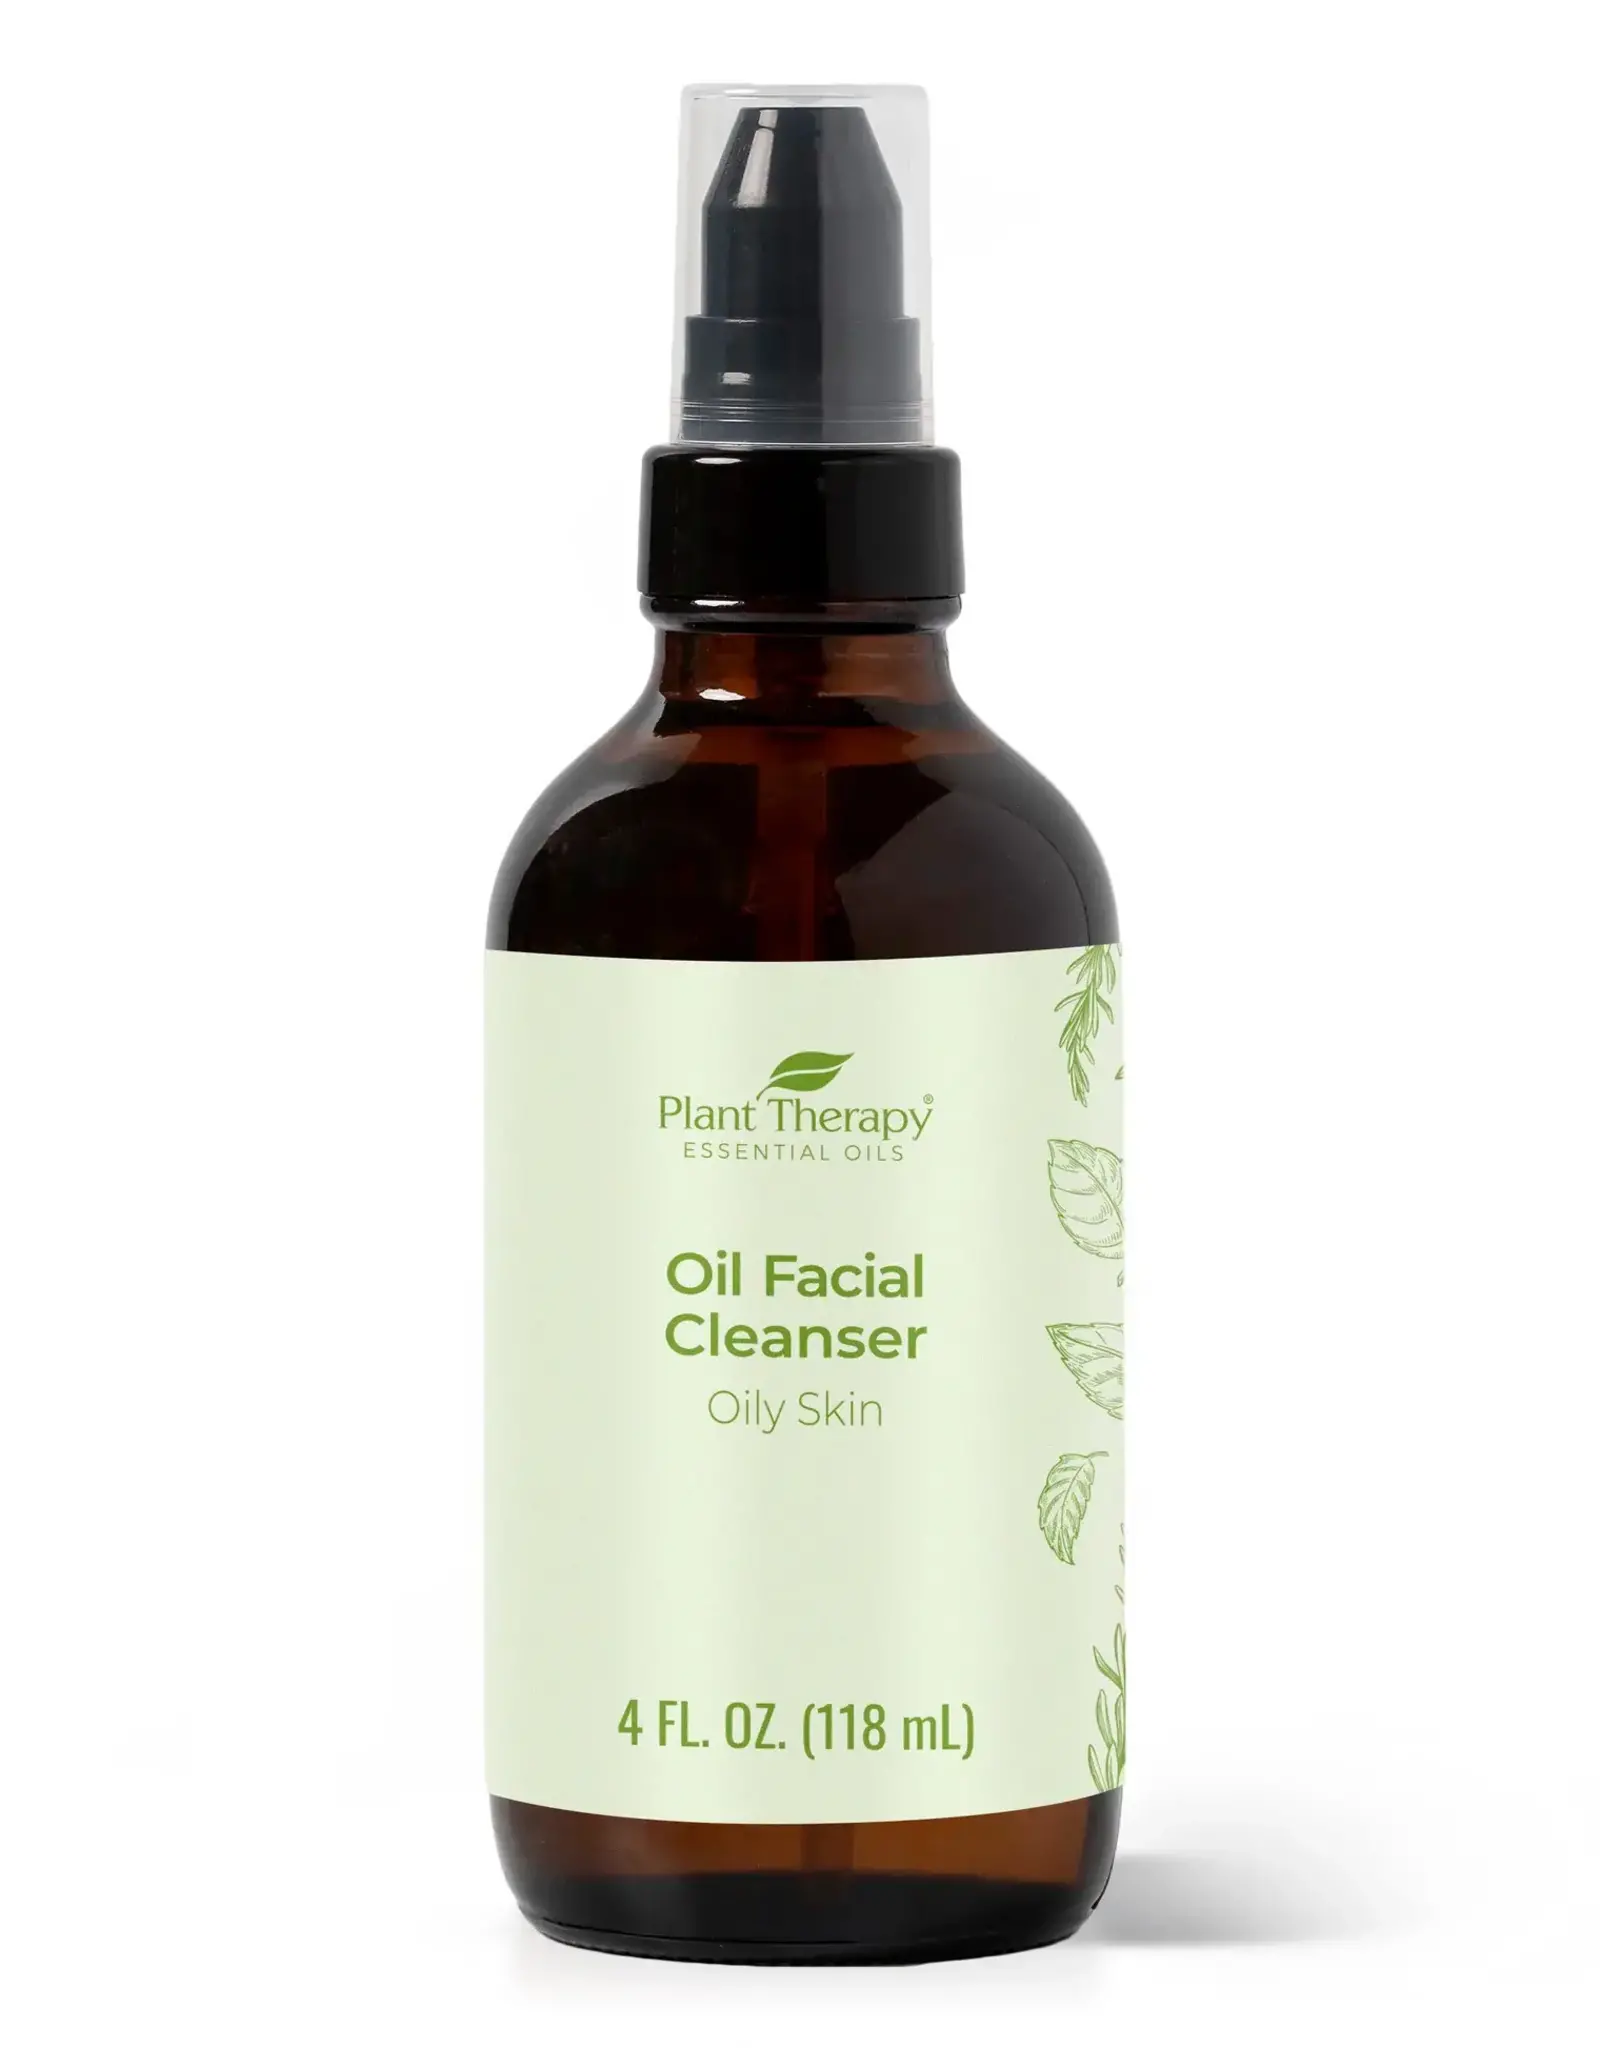 Plant Therapy Oil Facial Cleanser for Oily Skin